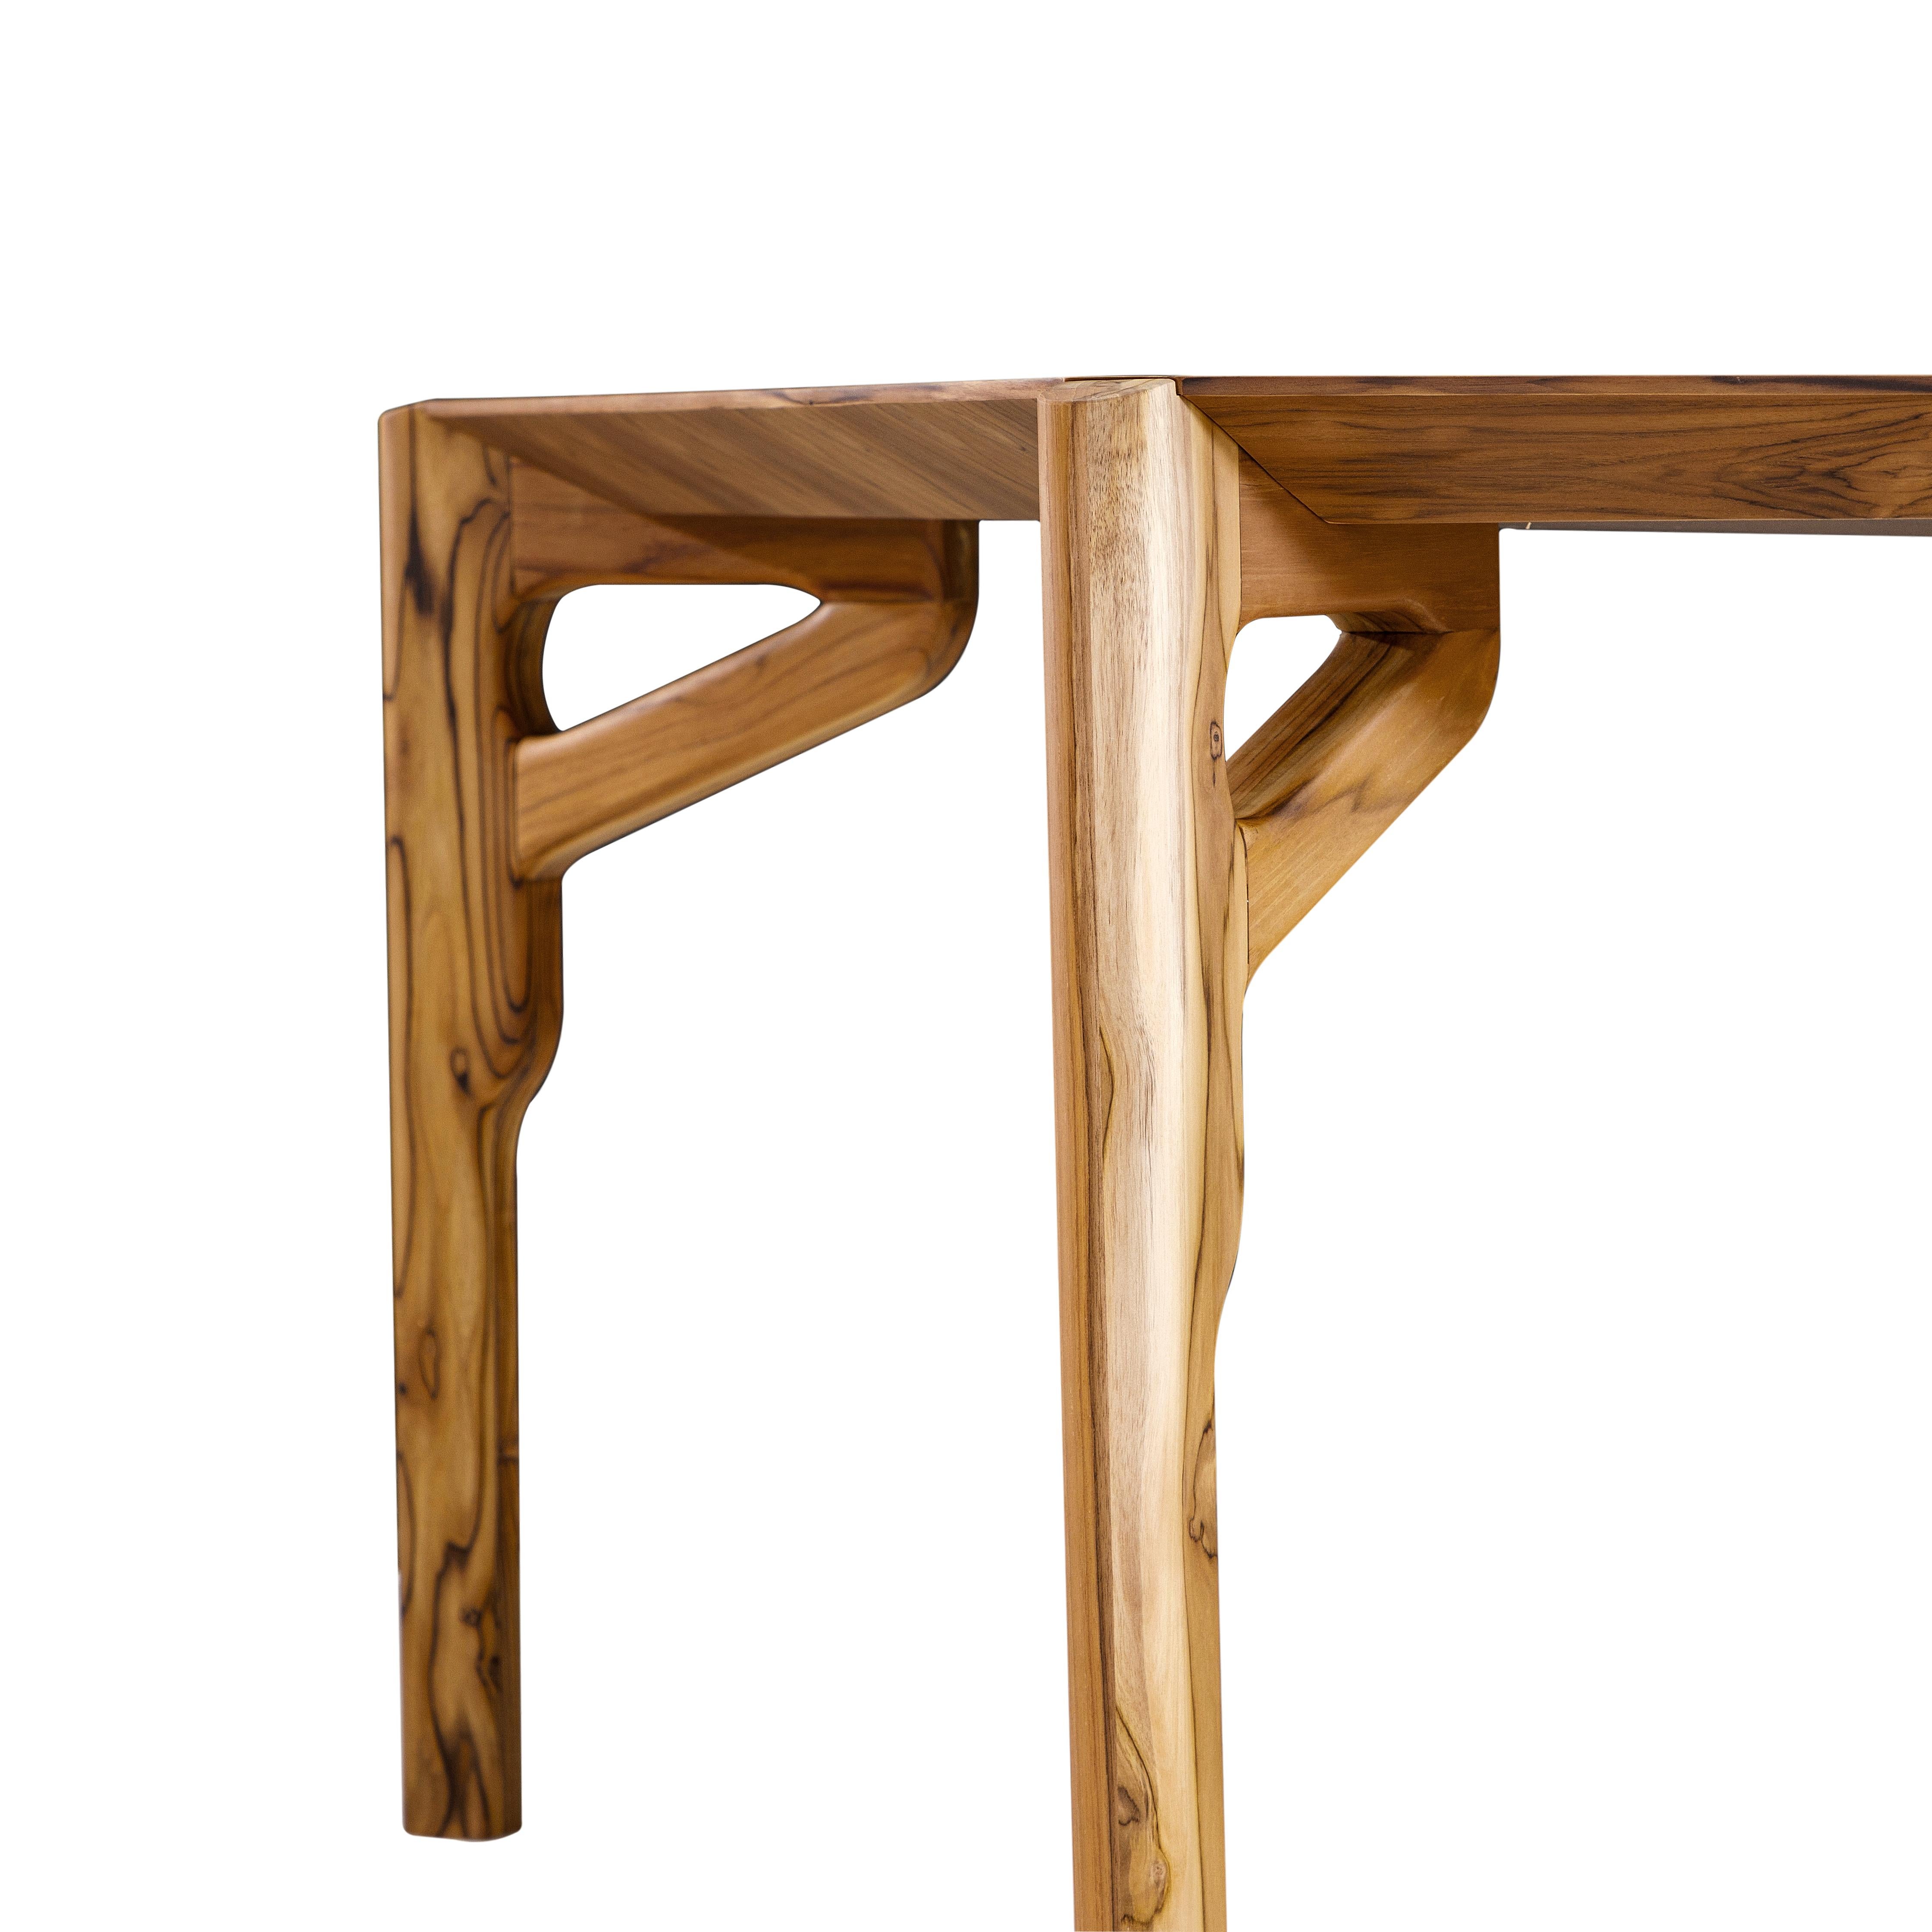 Contemporary Hawk Dining Table with a Teak Wood Veneered Table Top 86'' For Sale